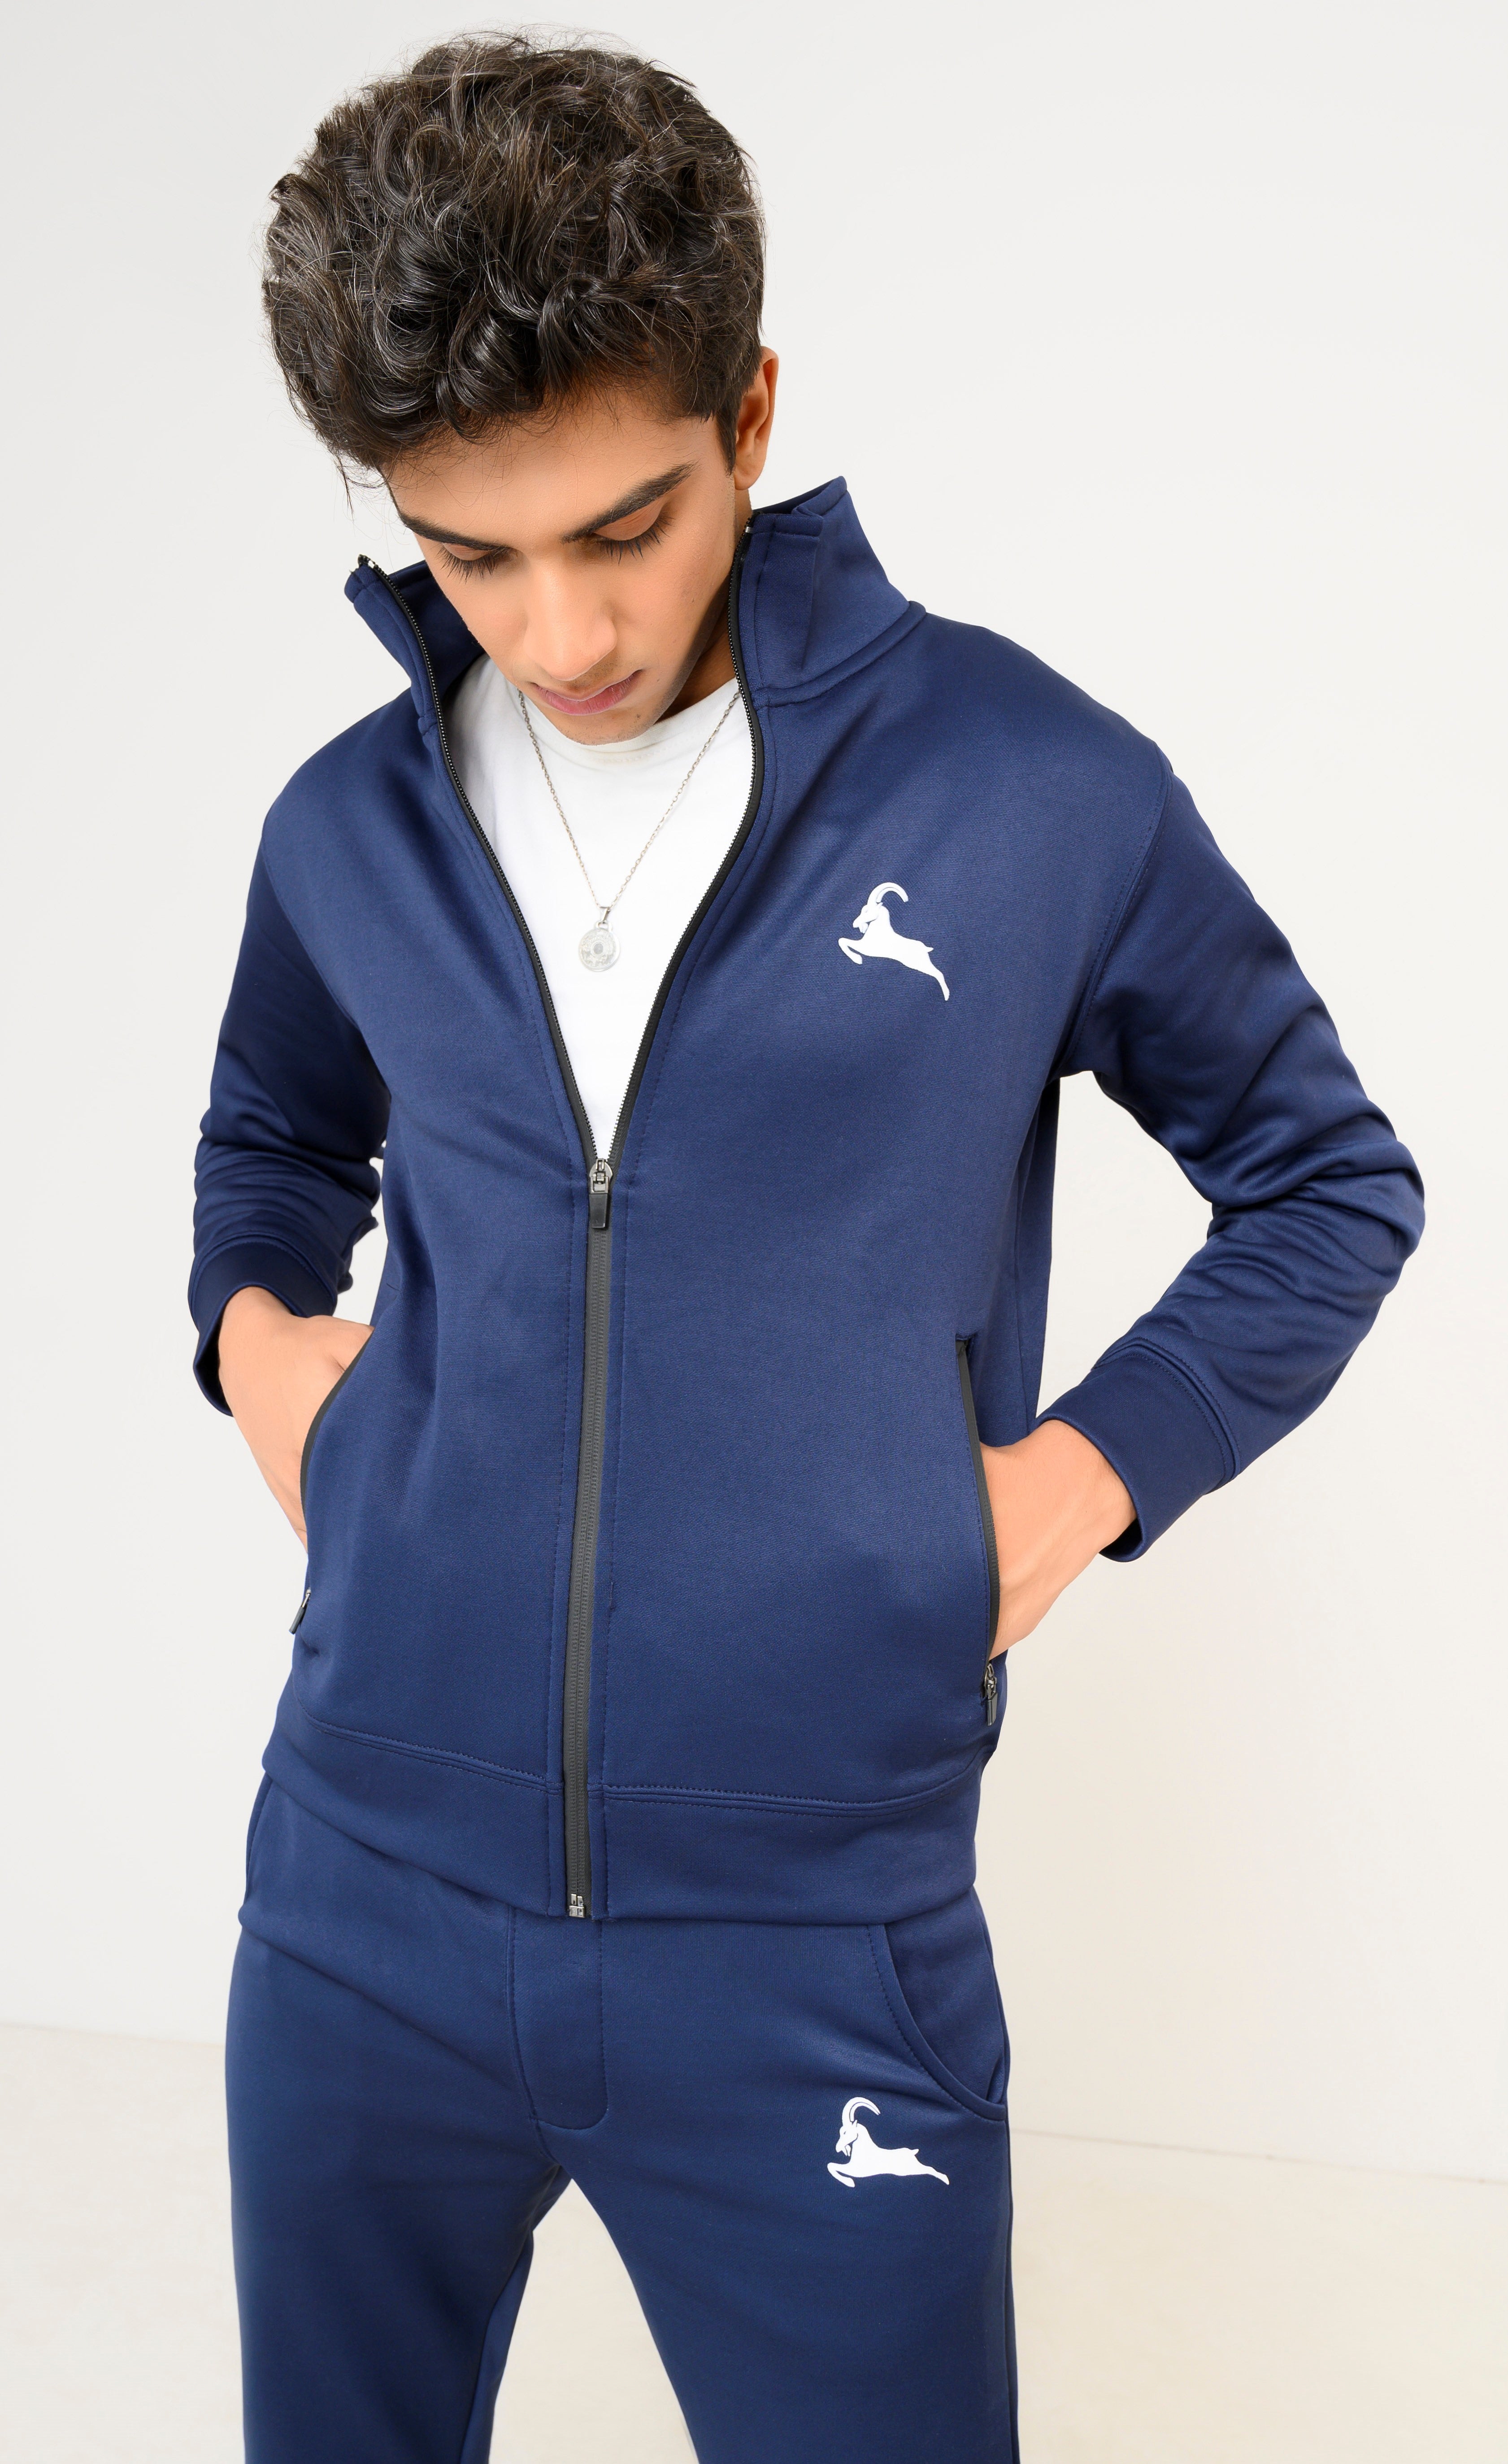 Buy Tracksuits For Men And Women Online In Pakistan  Gym Wear  Wild Goat  Clothing